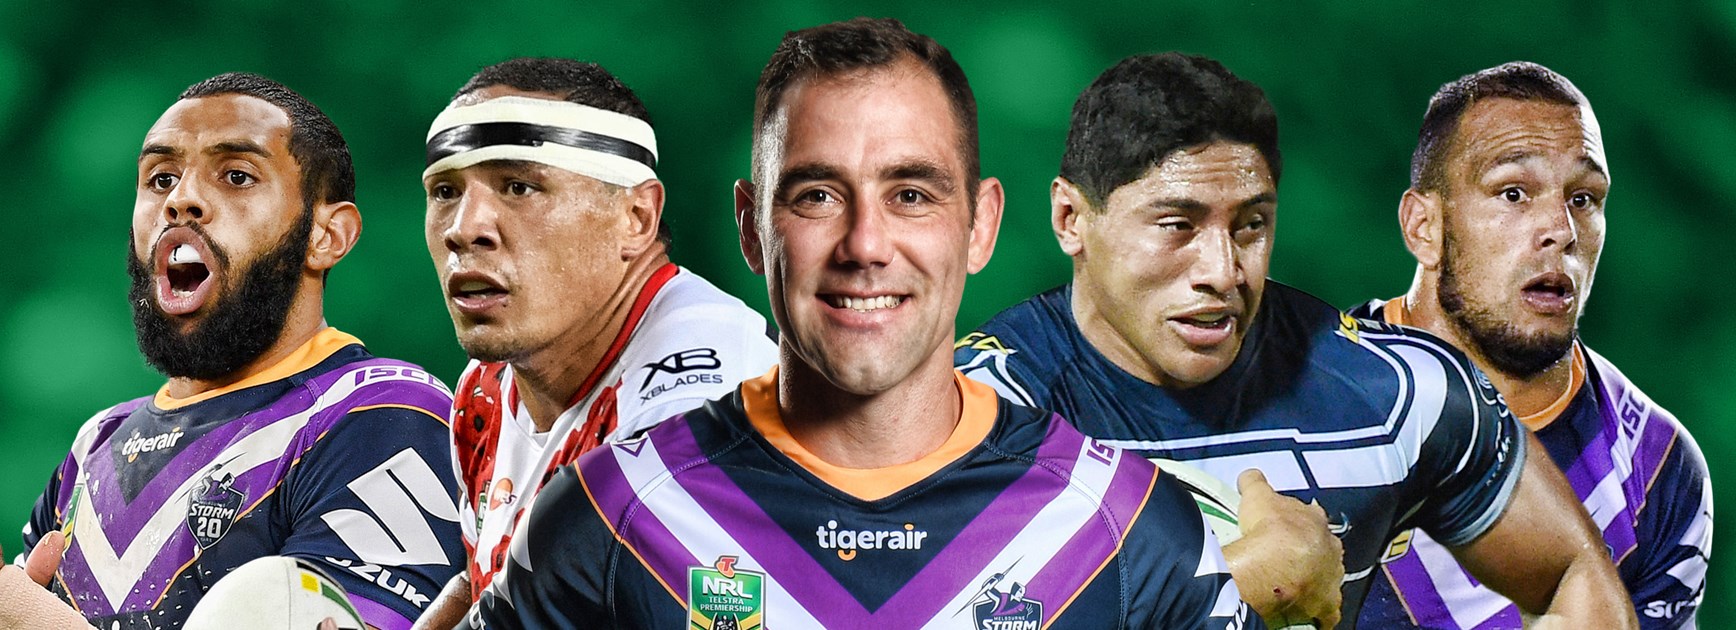 NRL.com Players' Poll: The full results